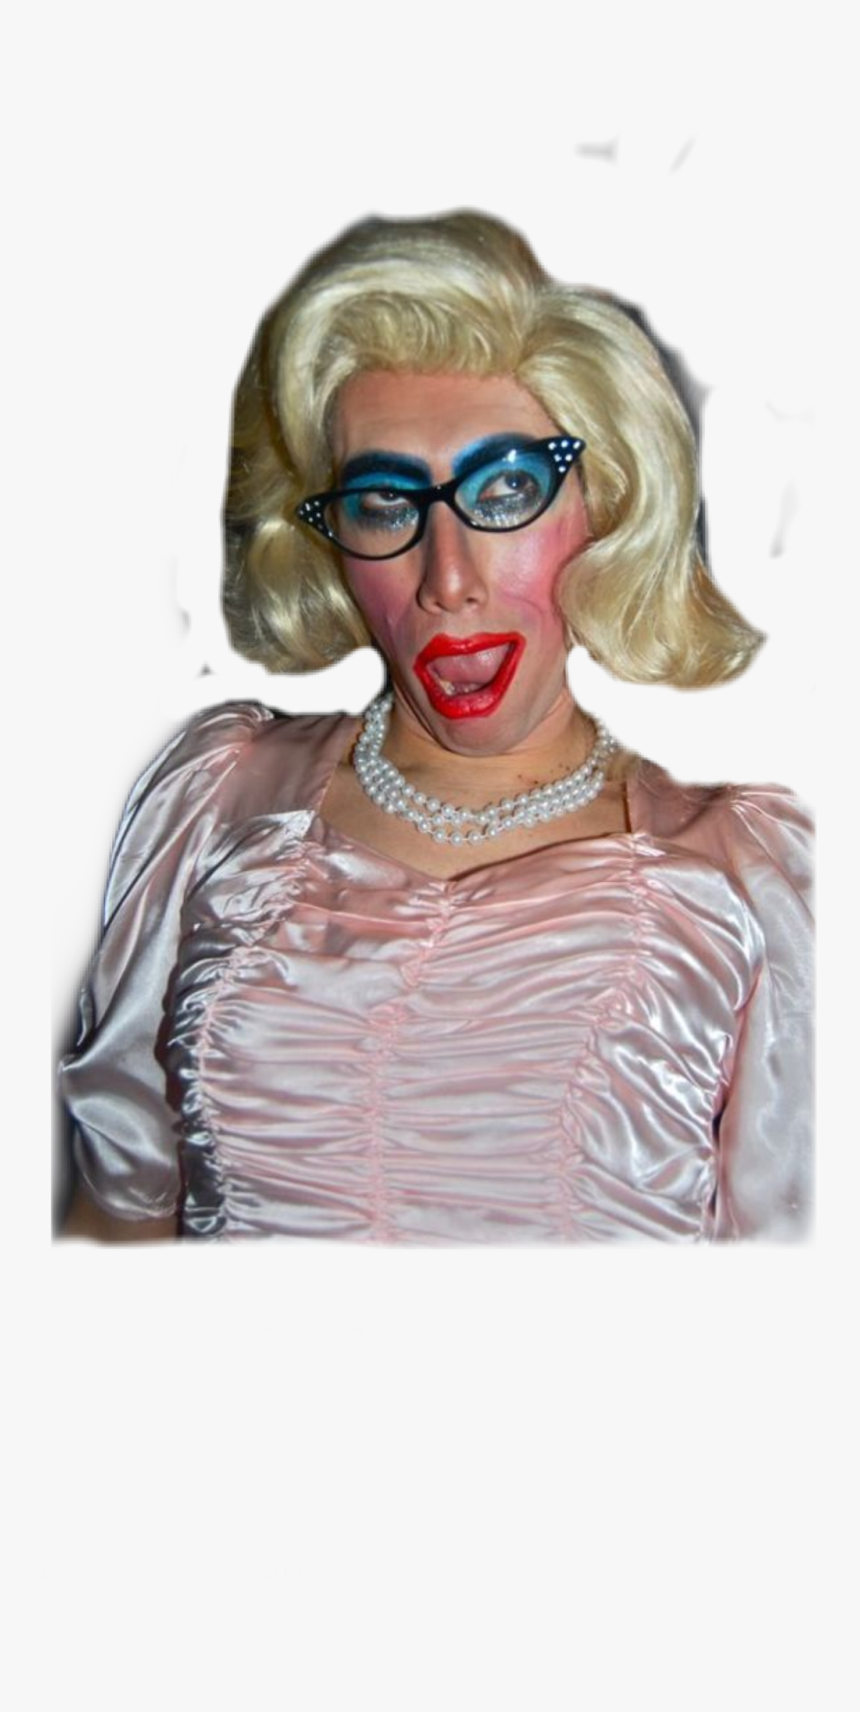 #drag #queen #dragqueen #lady #style #fashion #dressup - Ugly Drag Queen Meme, HD Png Download, Free Download